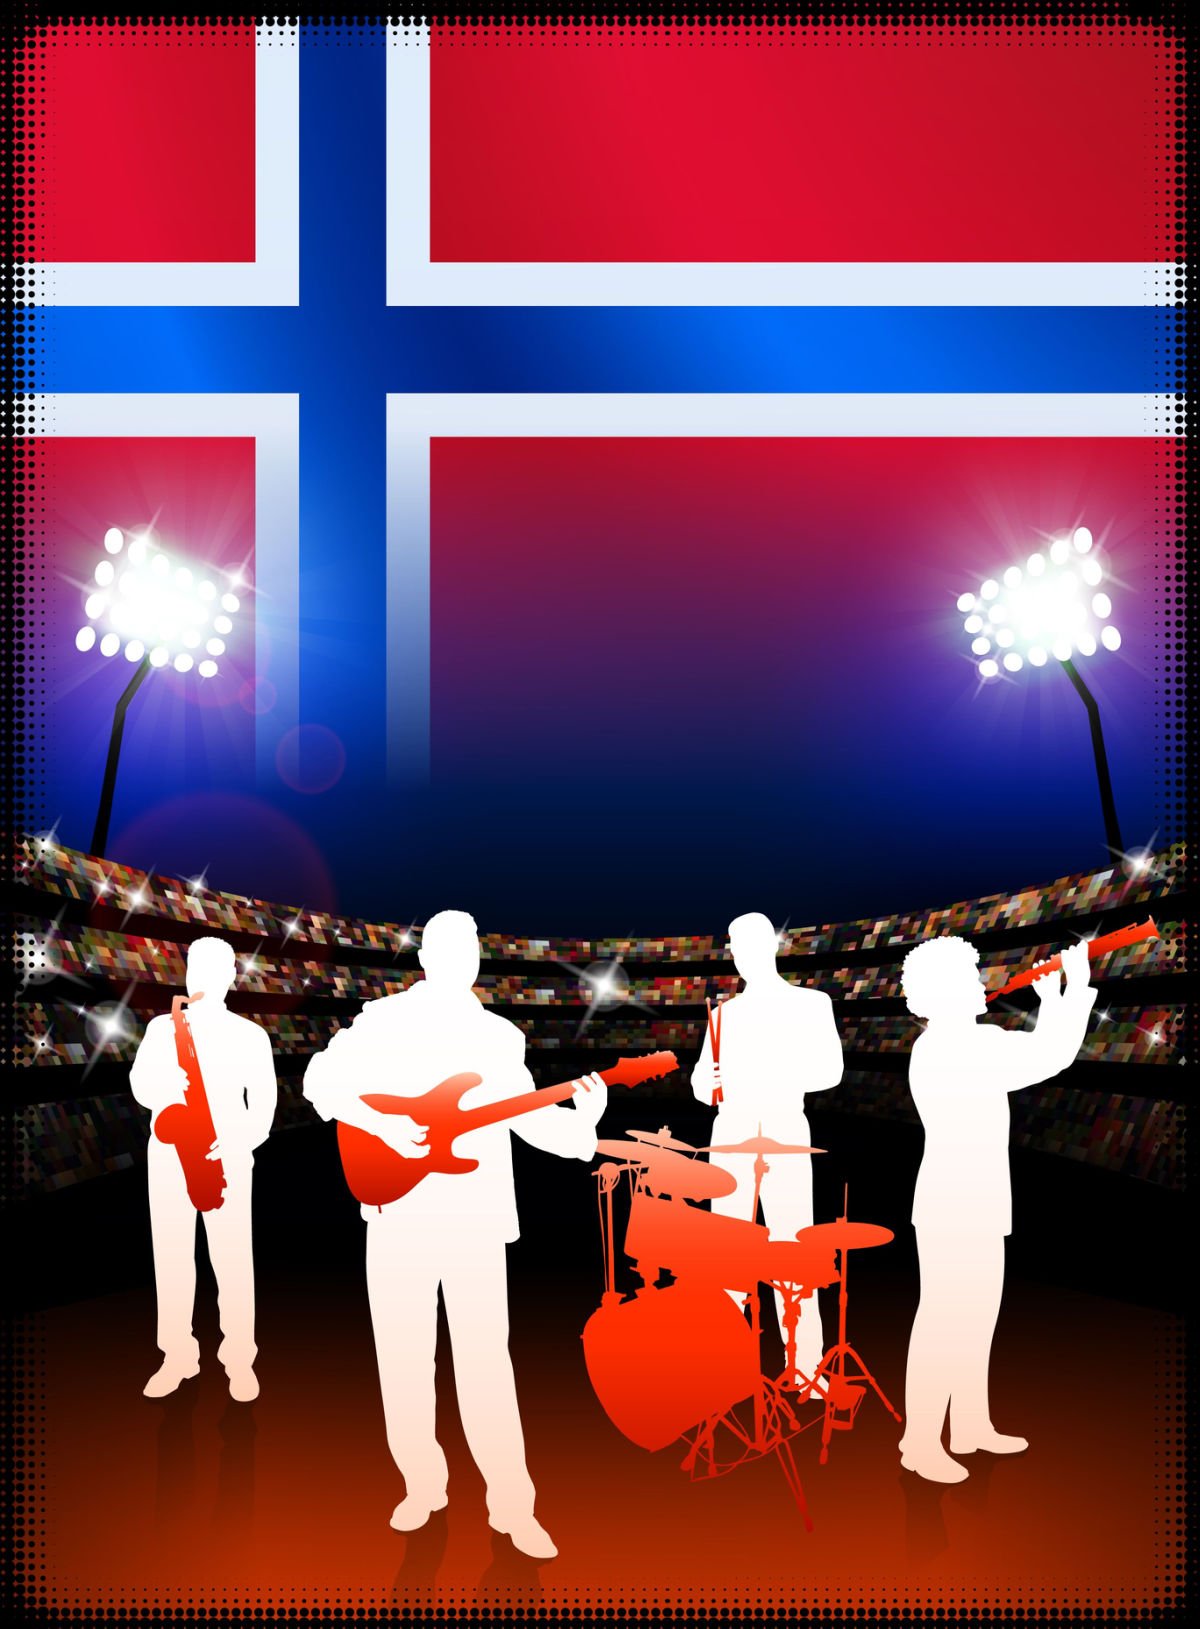 An image of a live band in Norway.